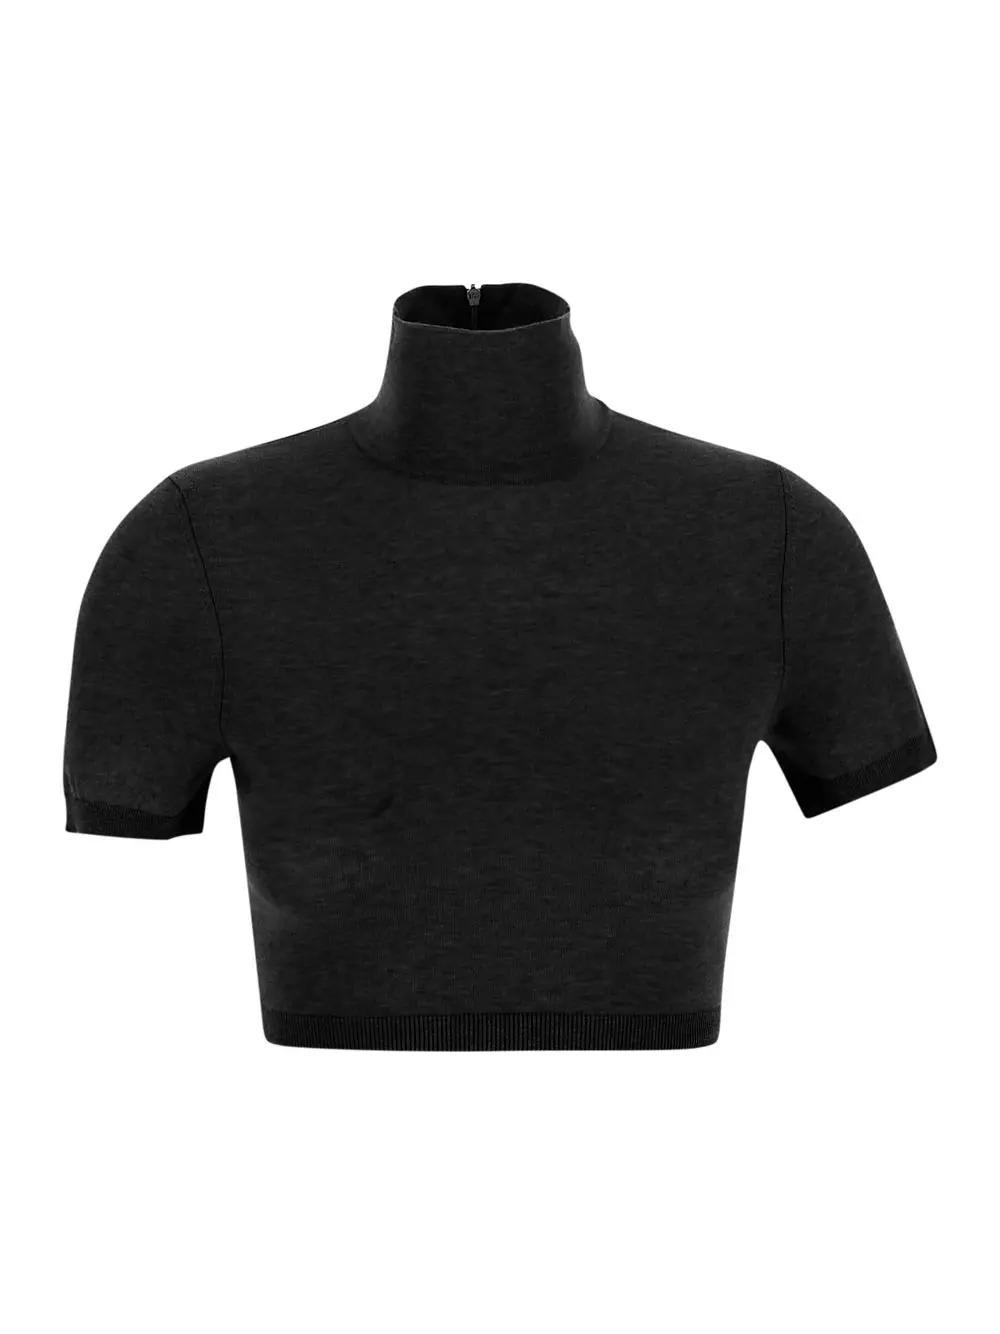 MAX MARA AIRE CROPPED TURTLENECK KNIT TOP